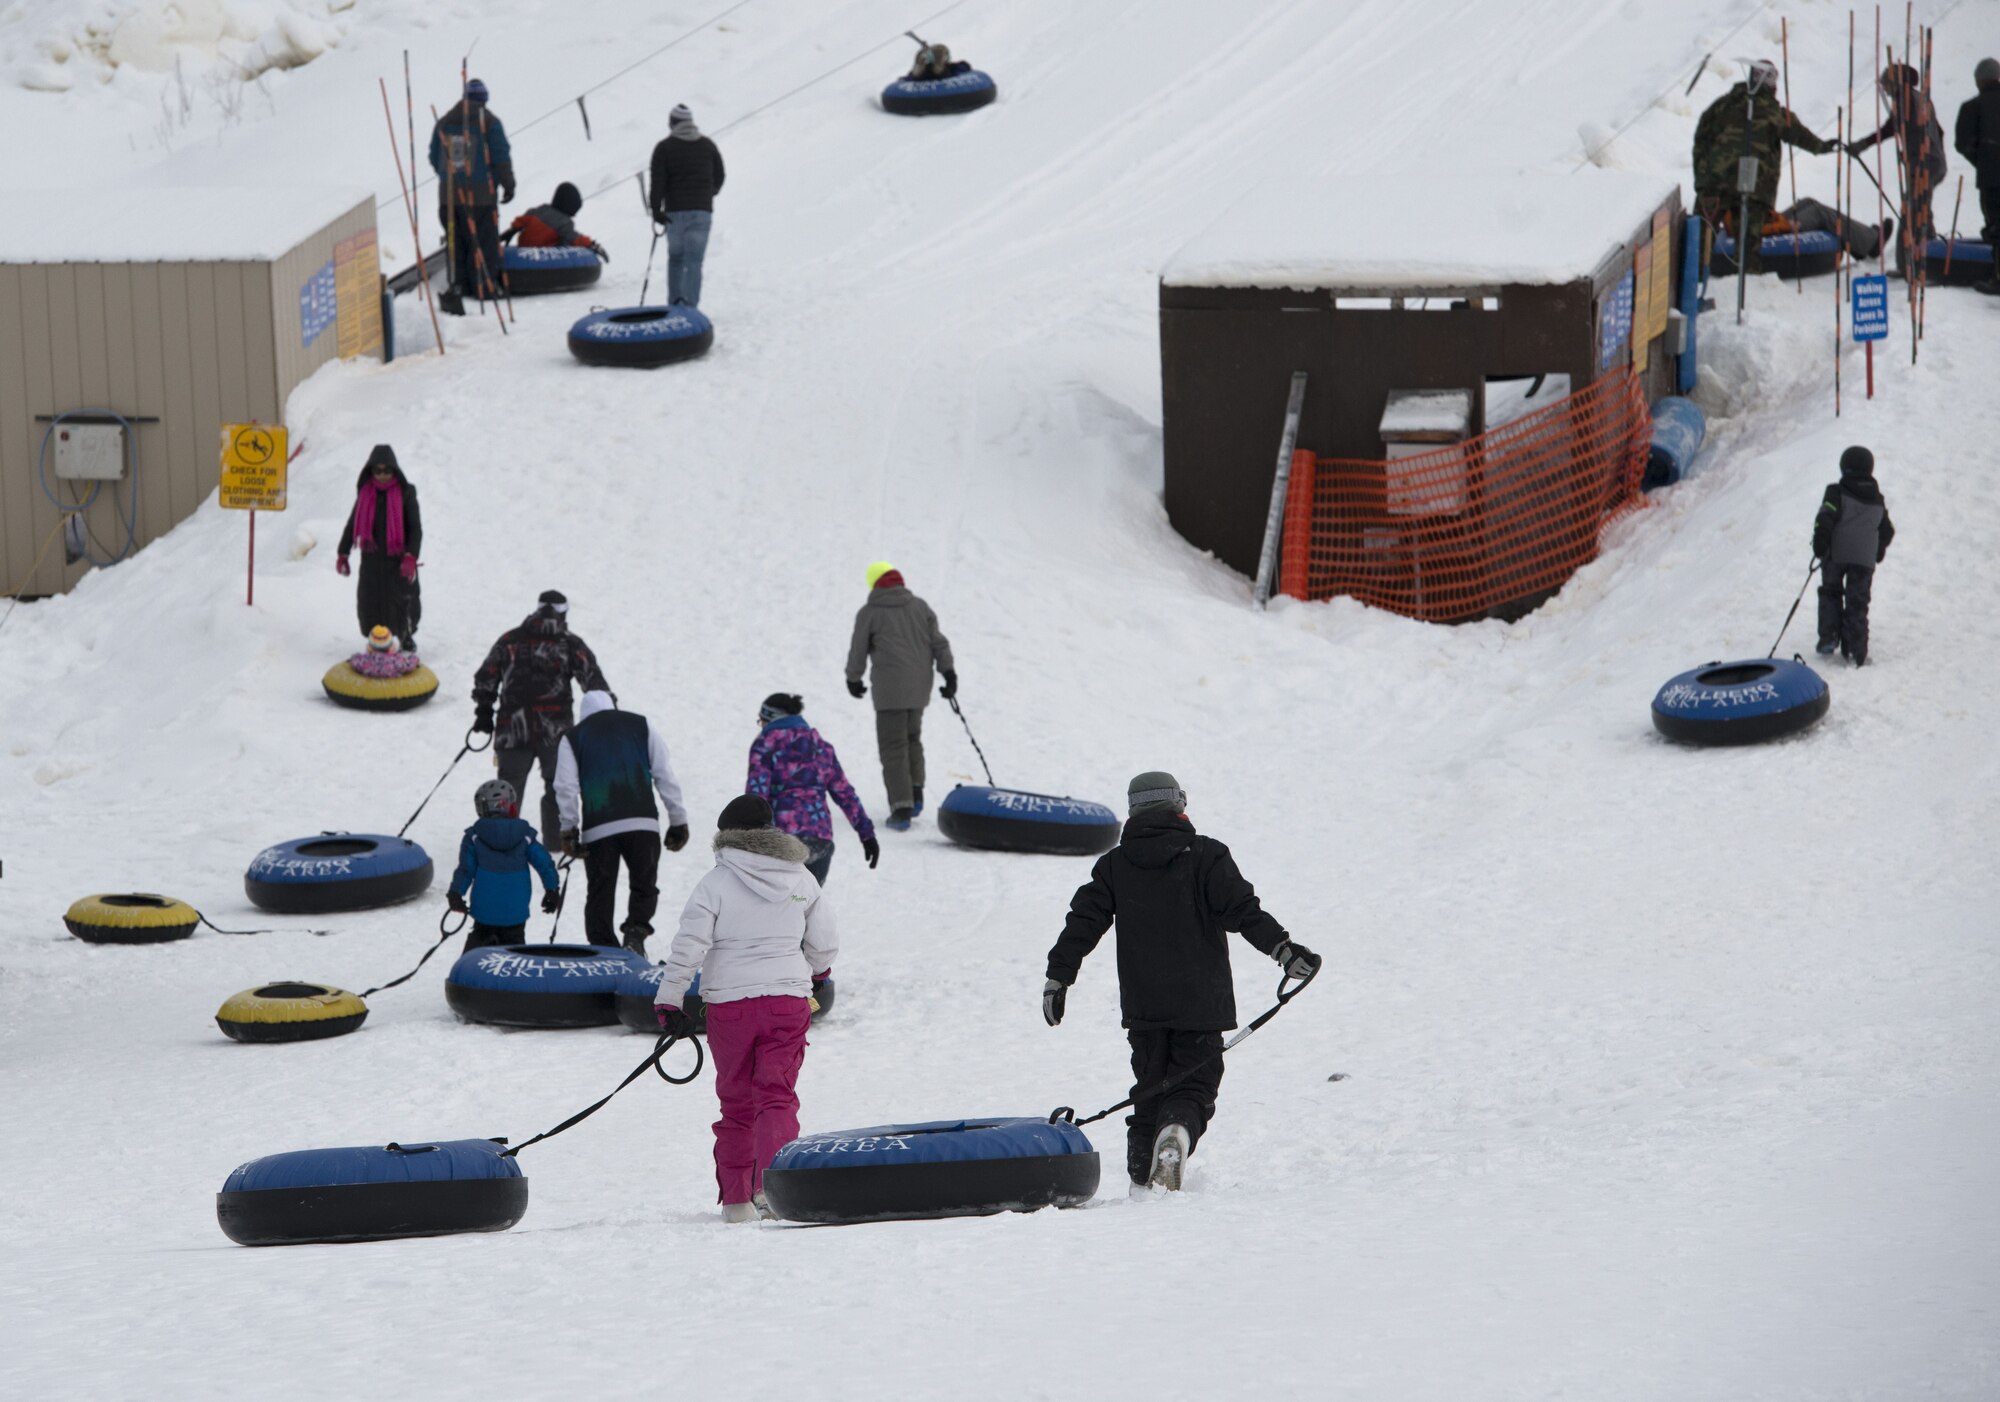 Children and parents walk to the tube lift at the Hillberg Ski Area during Winterfest at Joint Base Elmendorf-Richardson, Alaska, Dec. 21, 2017. Winterfest was a winter solstice celebration hosted by Hillberg for anyone with base access and offered a plethora of events from noon to as late at 8 p.m.